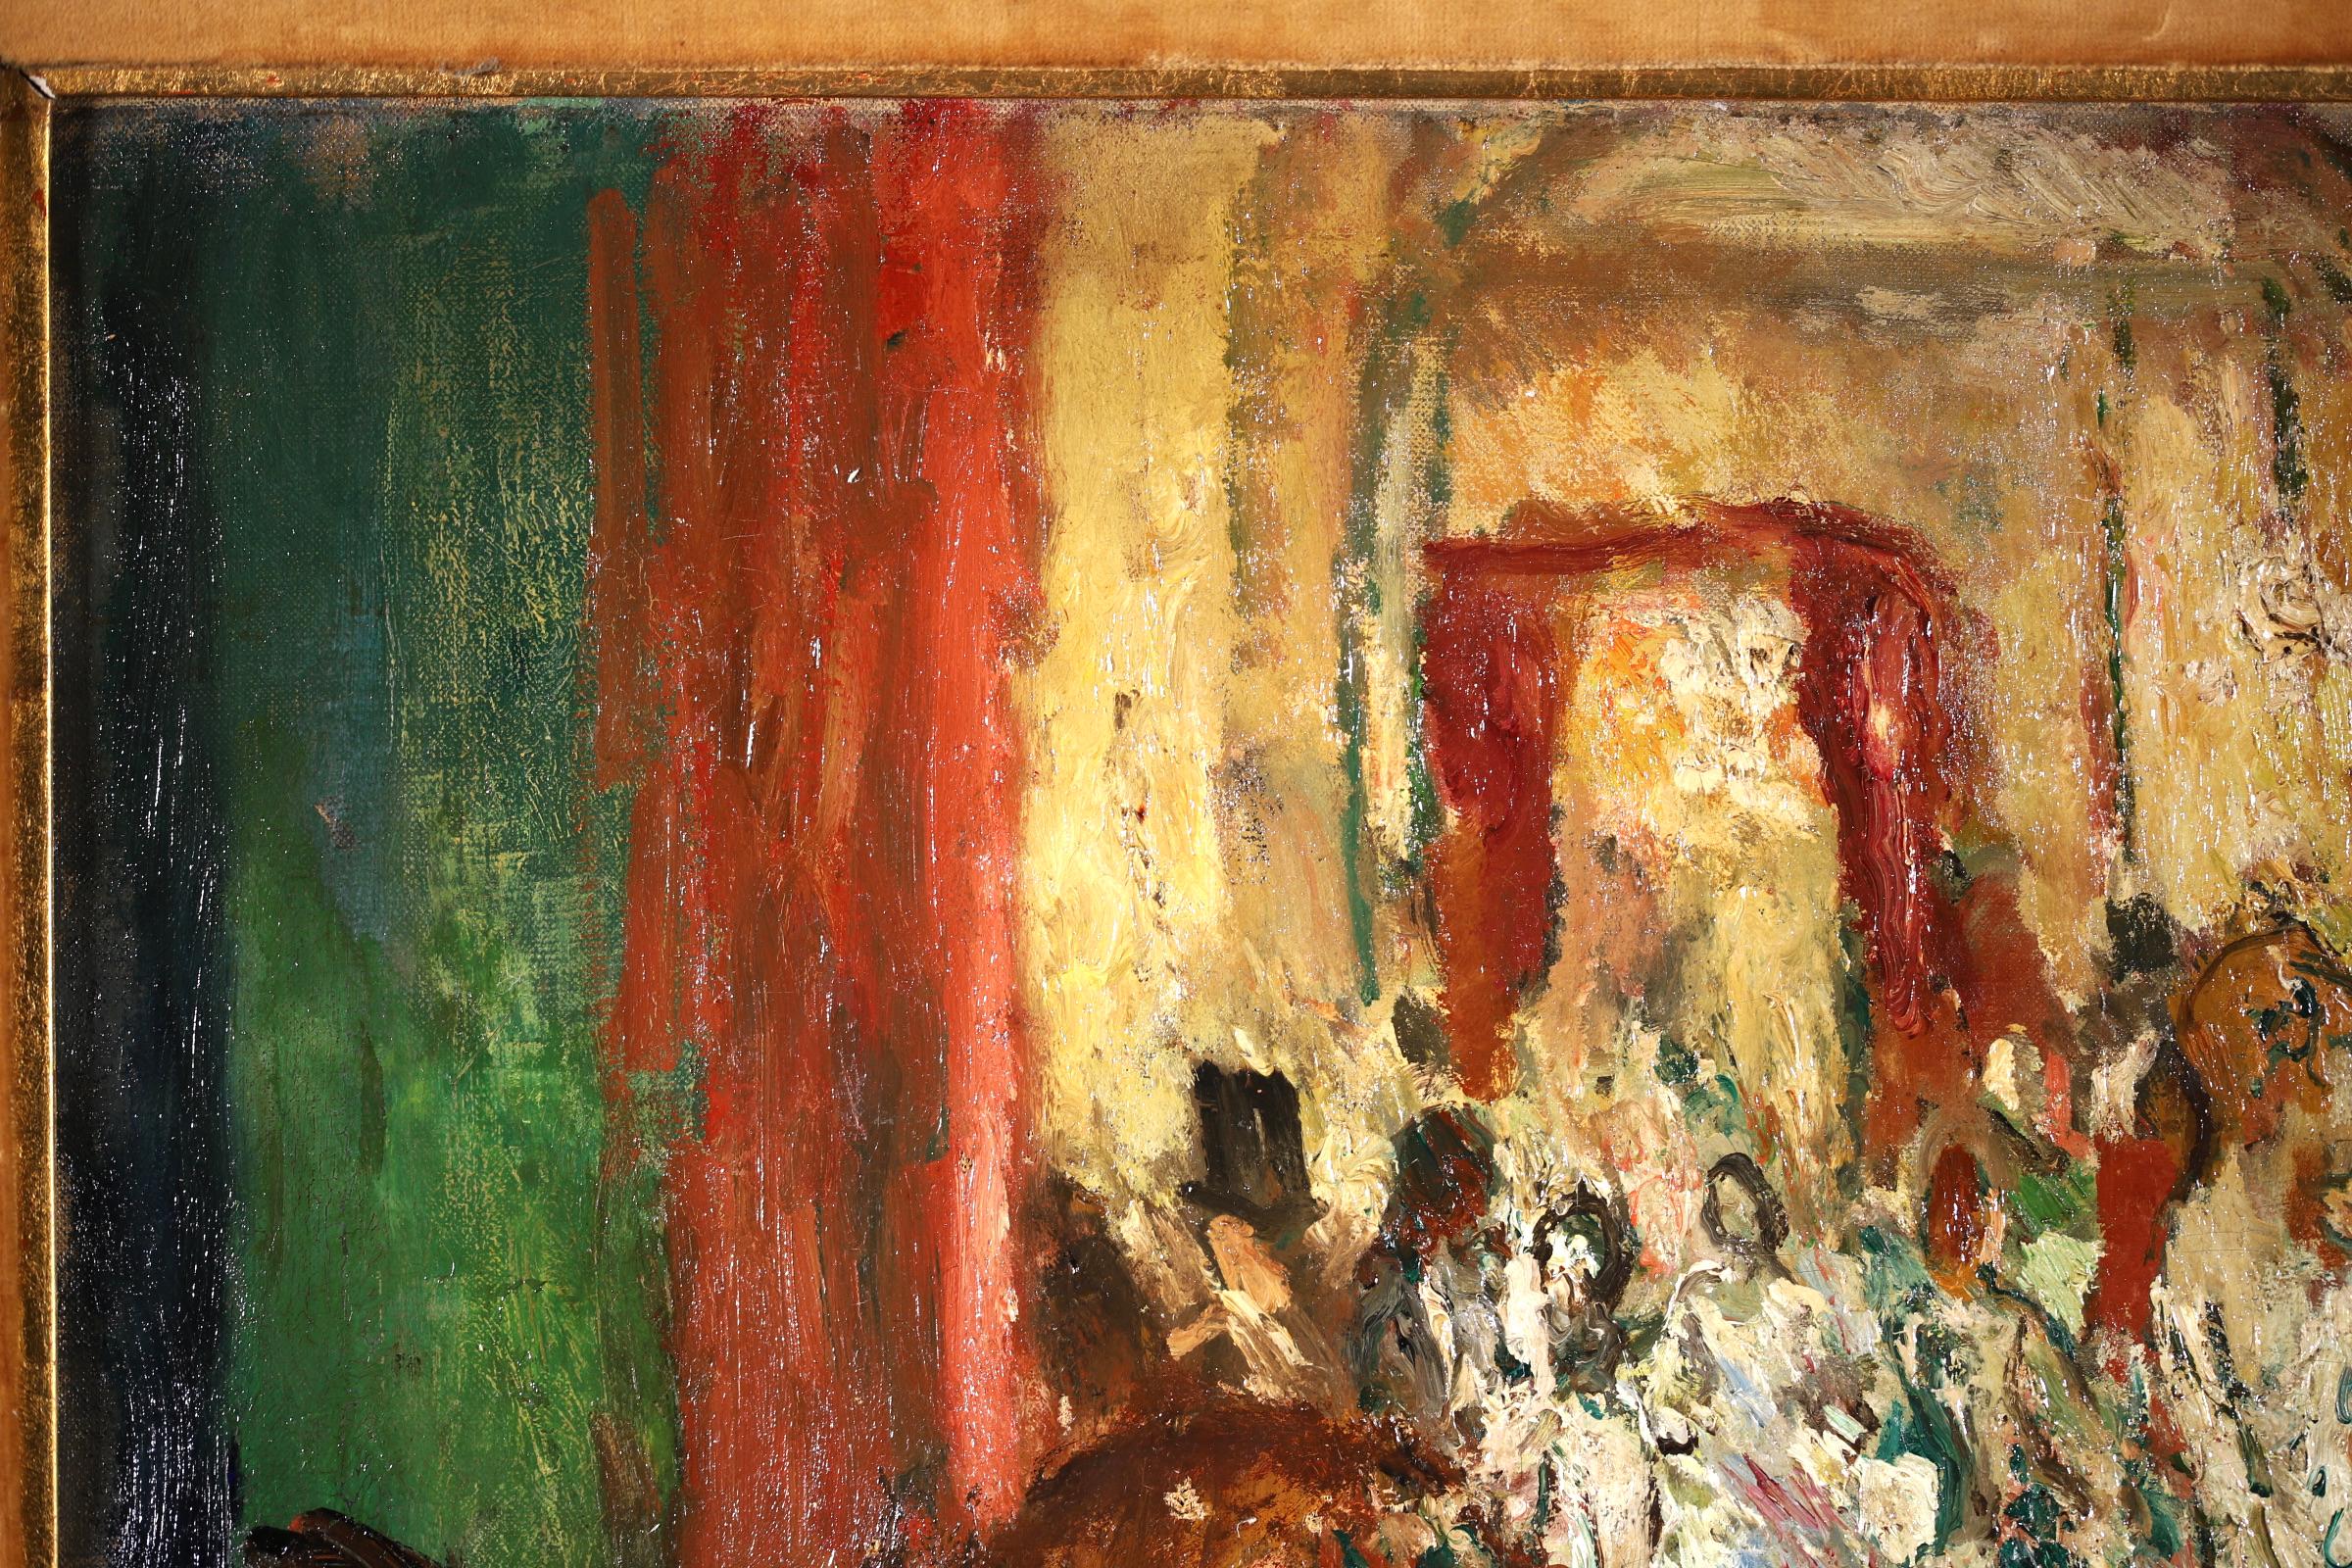 Dancer's Lodge - Post Impressionist Oil, Figures in Interior by Marcel Cosson 1